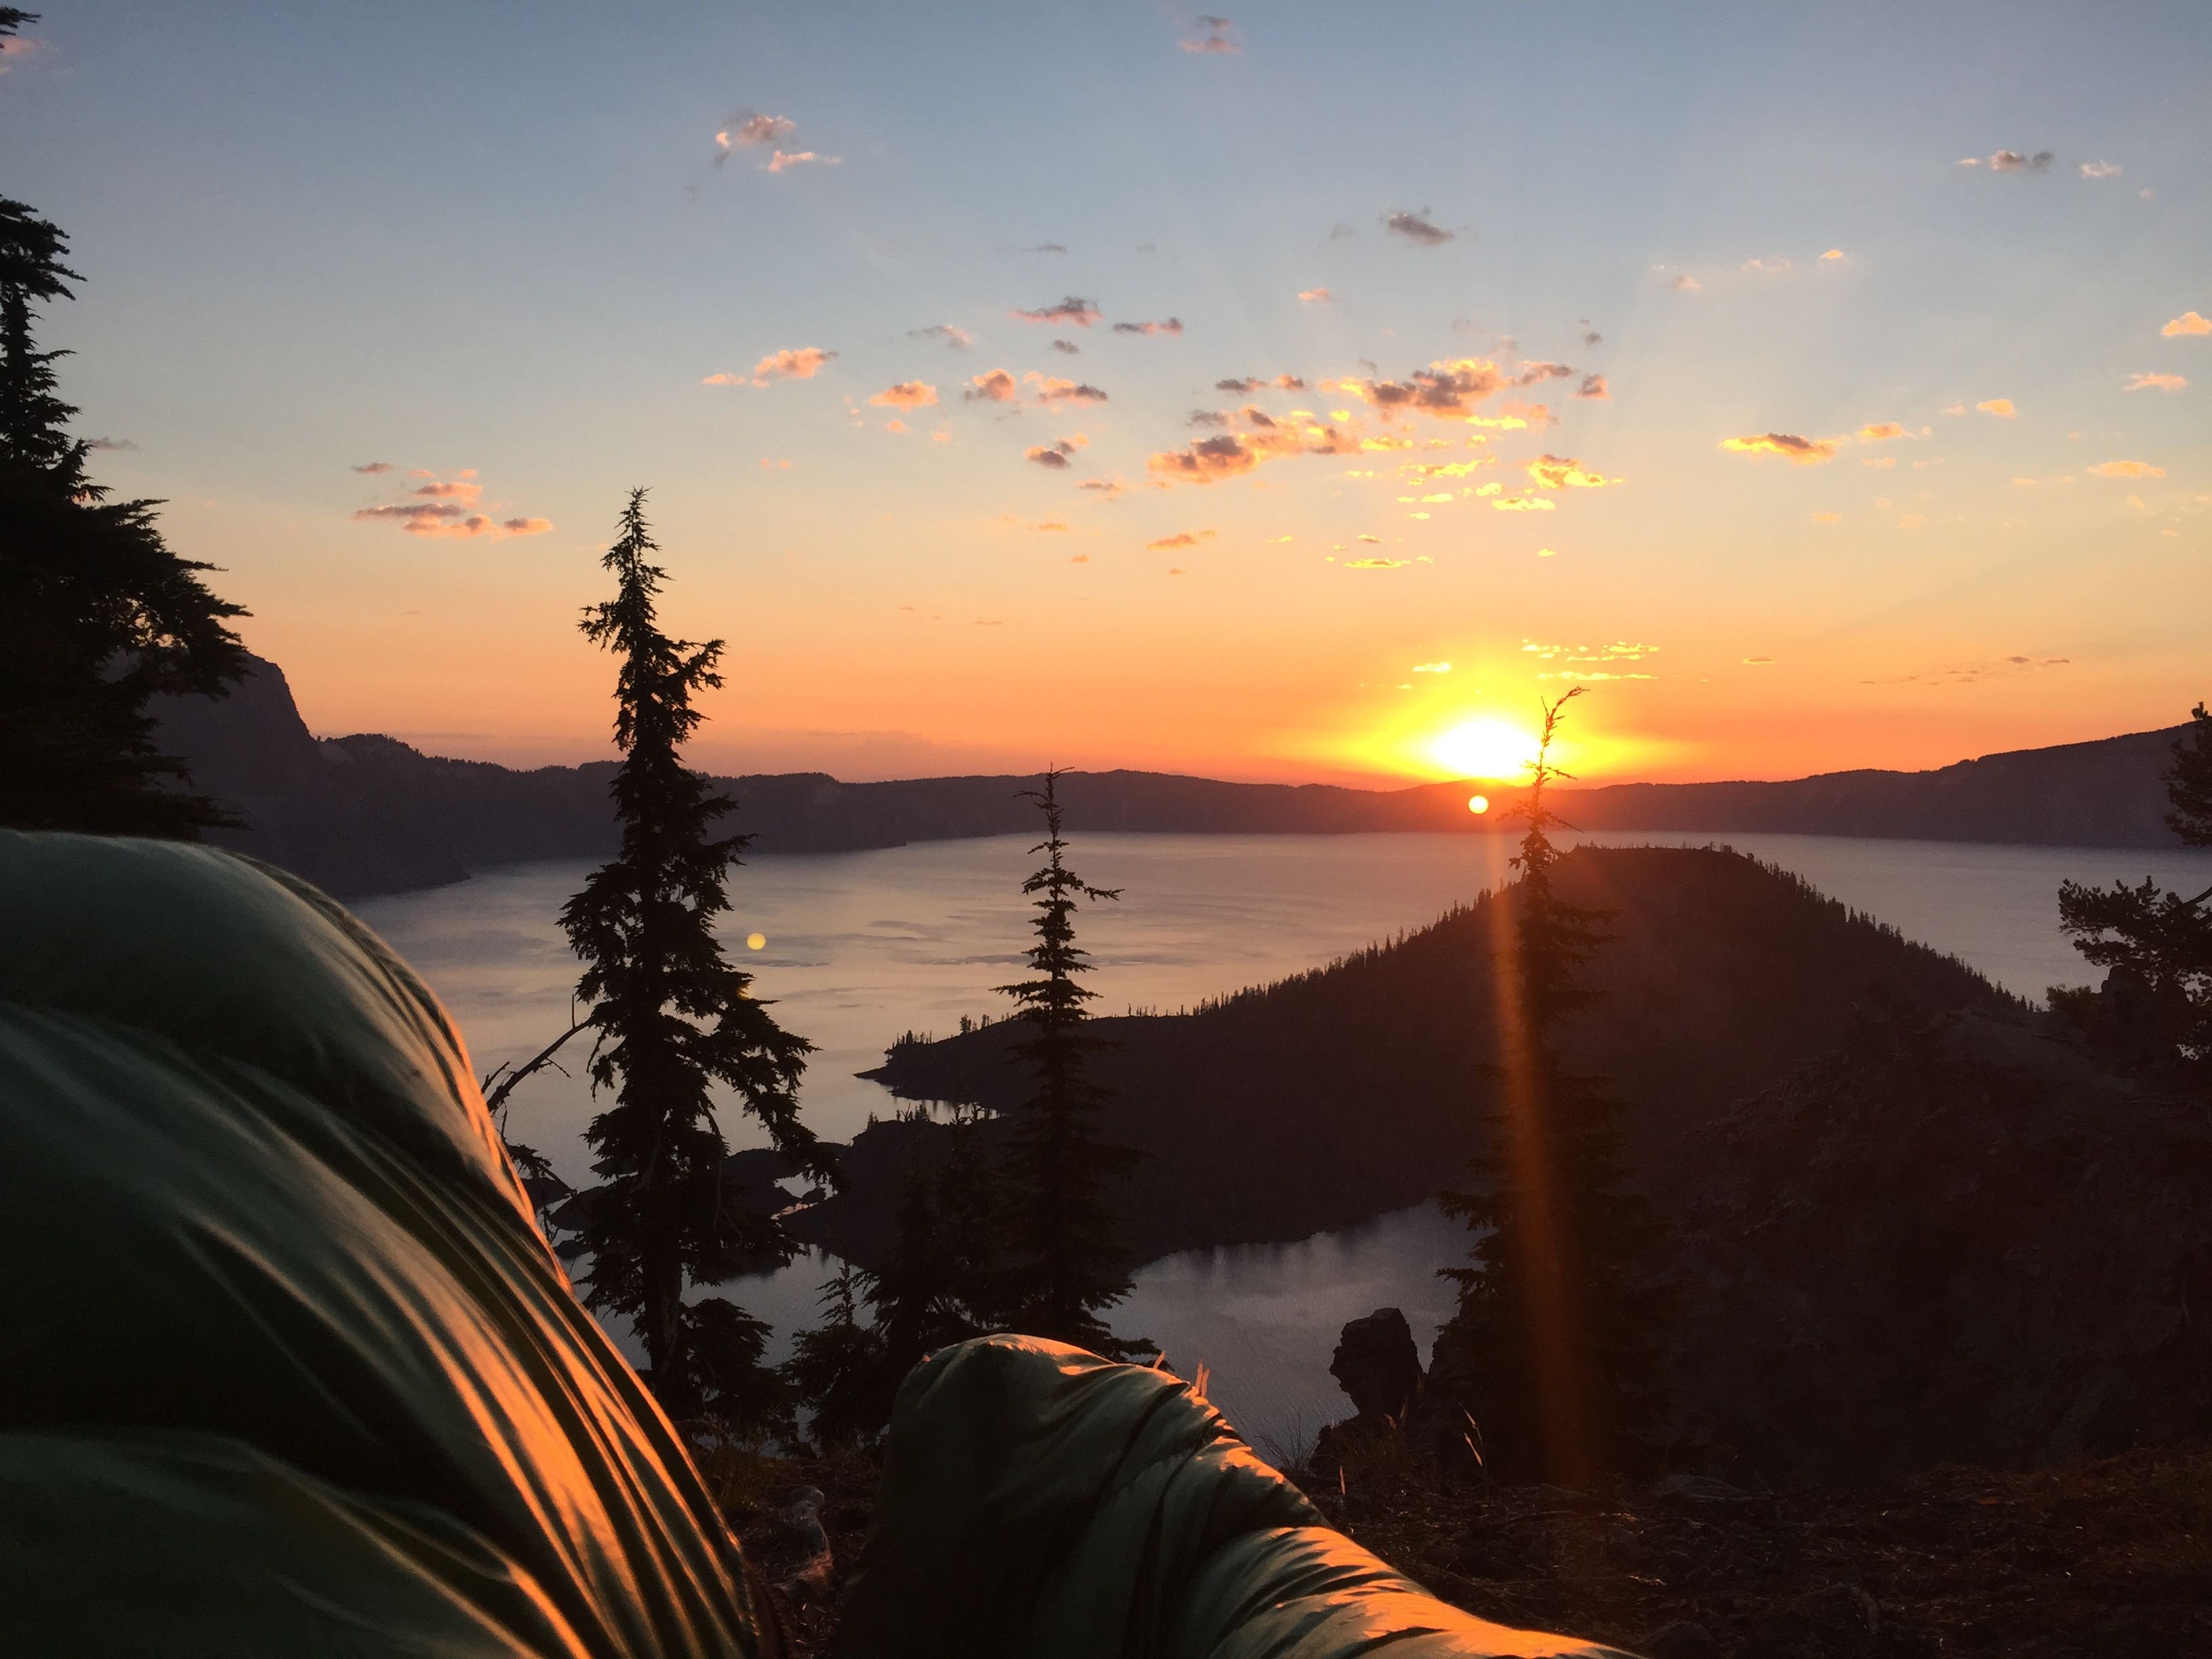 Day 127: Sunrise Over Crater Lake